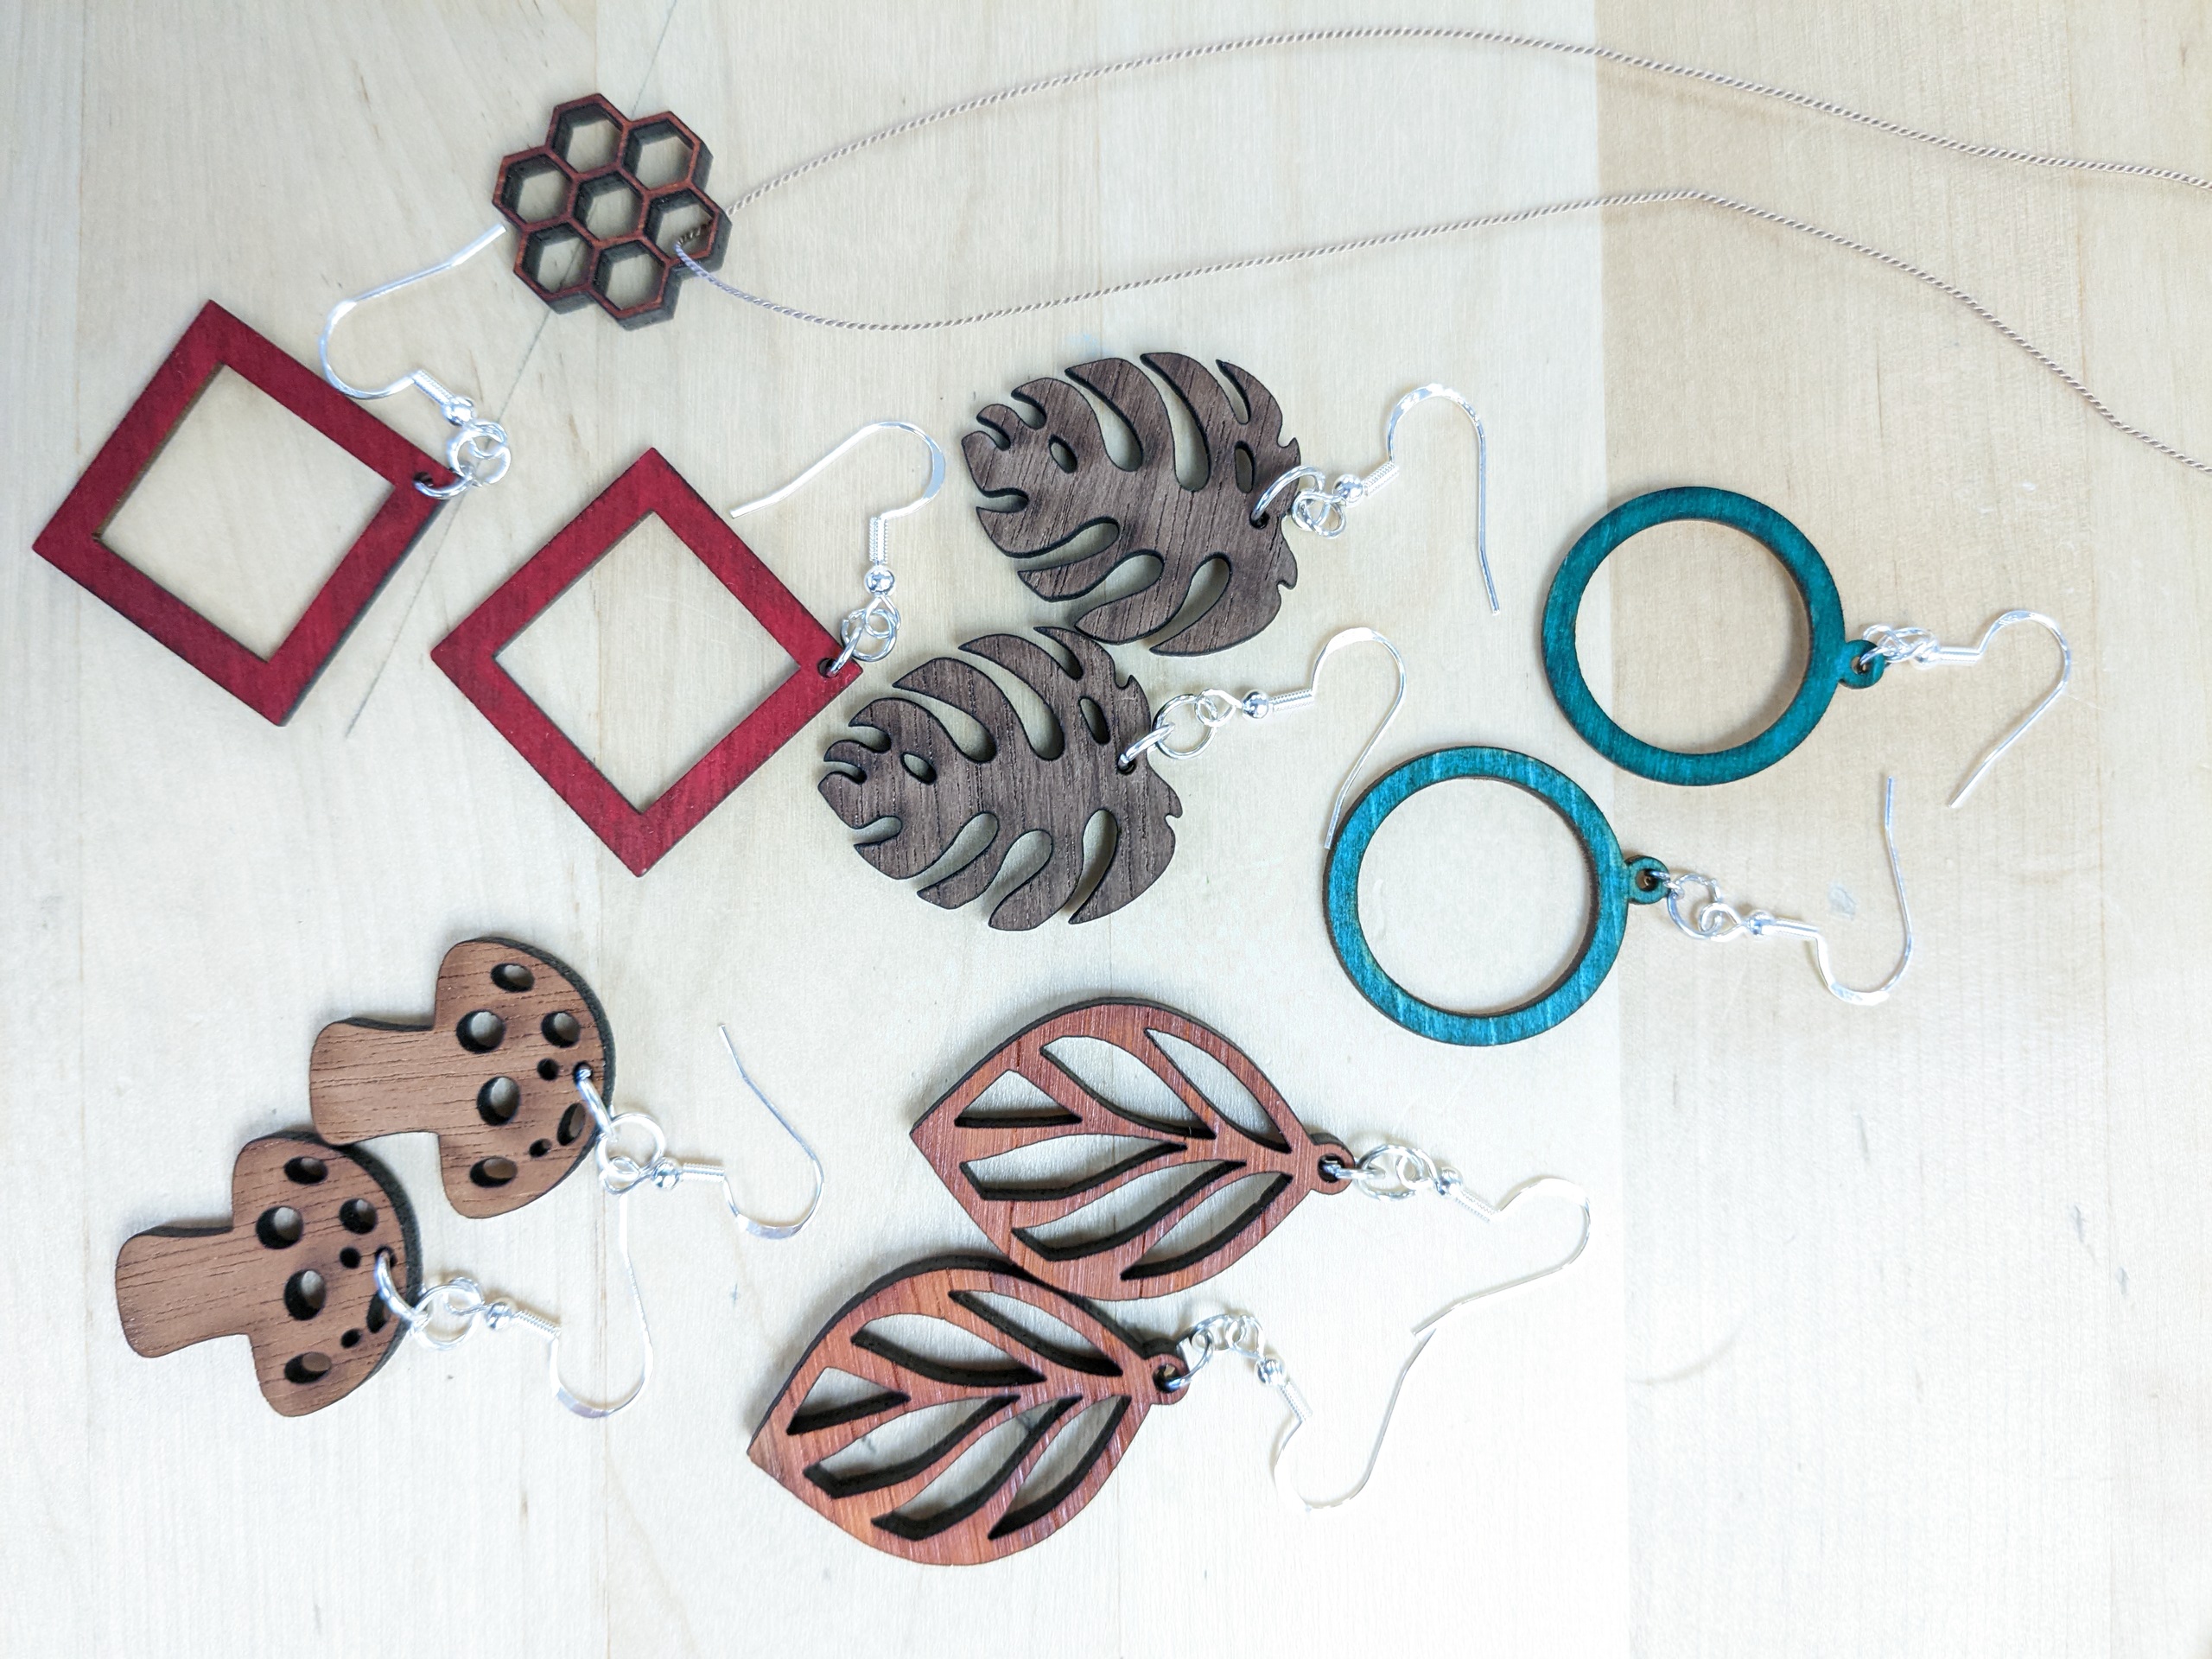 Various cut shapes from hardwoods on an earring wire